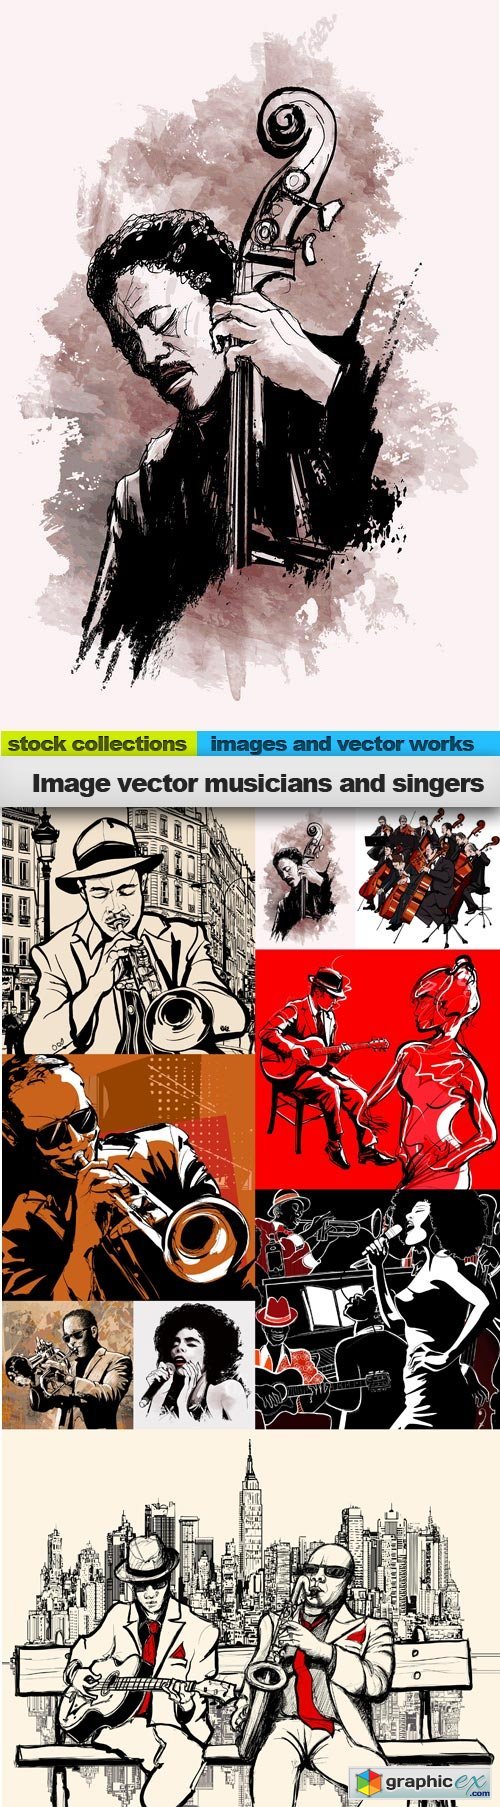 Image vector musicians and singers, 10 x EPS